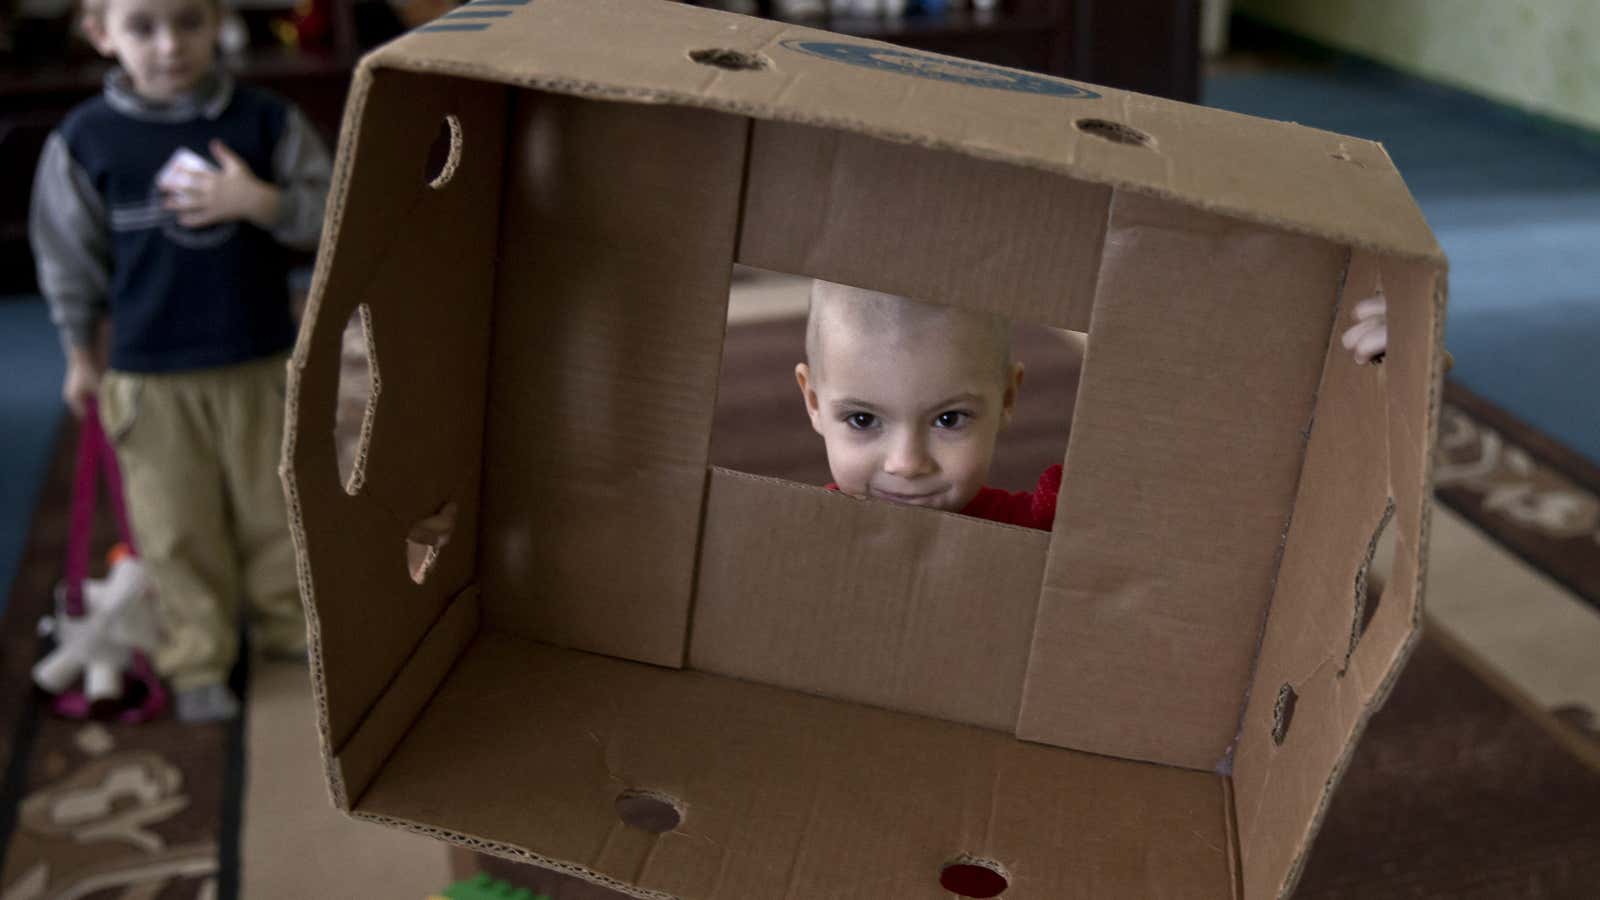 The box is a great toy, but not a great metaphor for innovation.